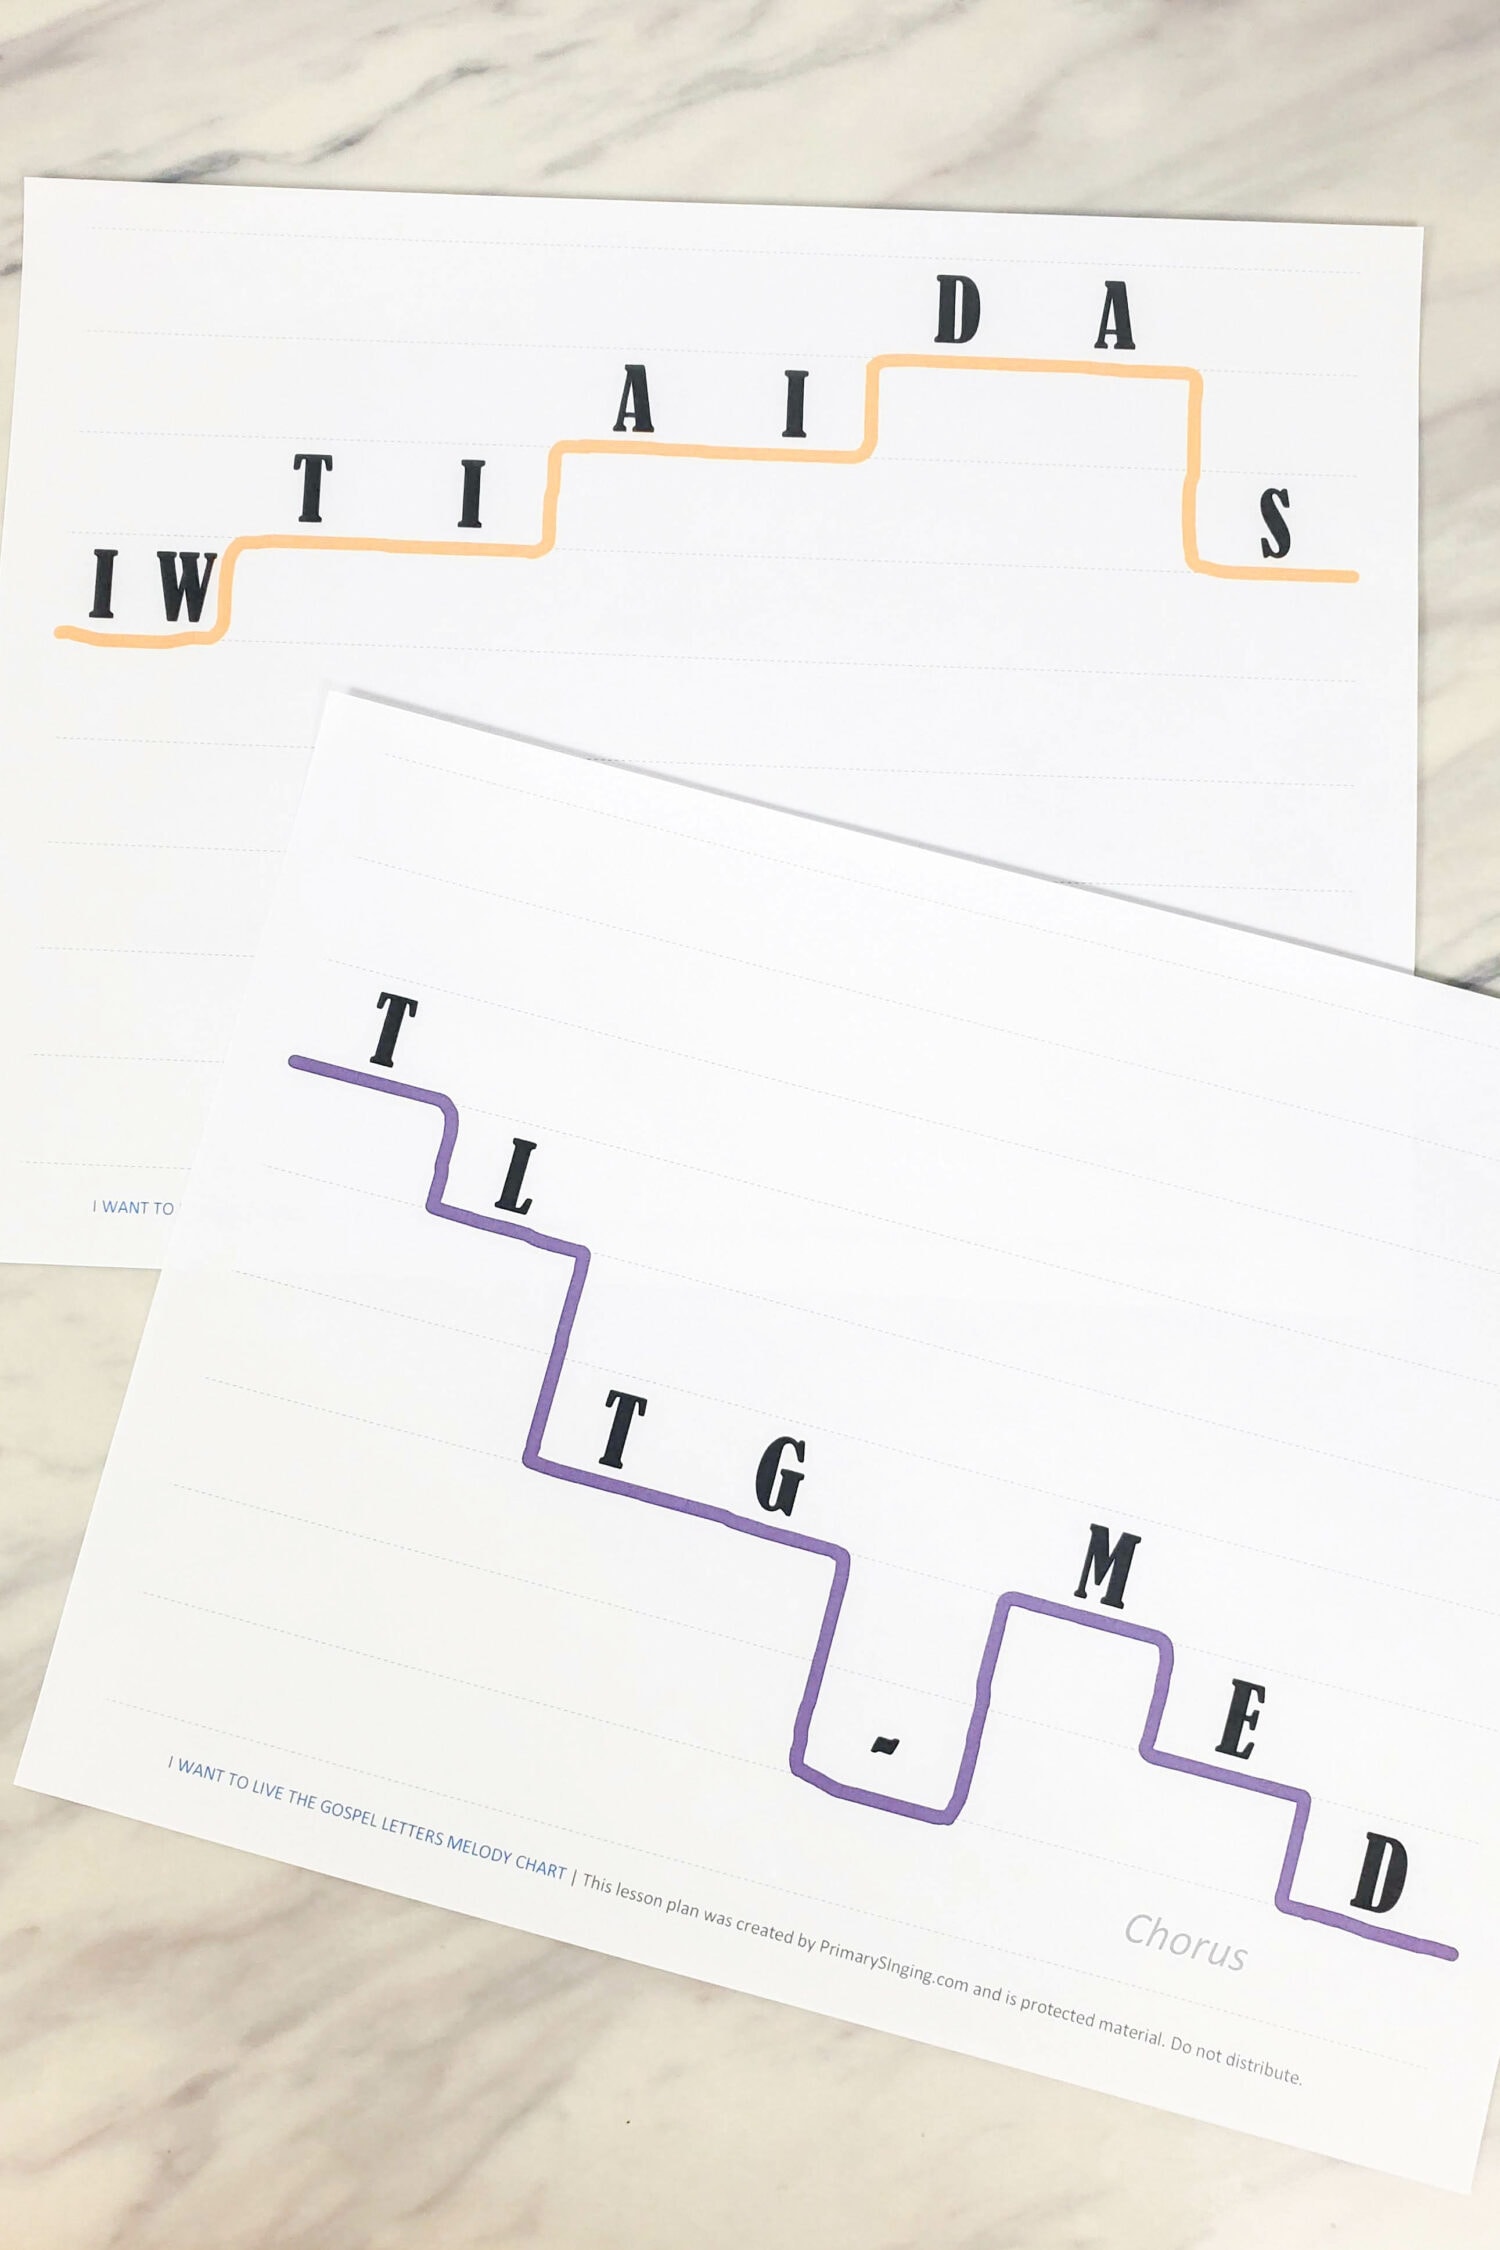 I Want to Live the Gospel Letters Melody Chart fun singing time idea to help the kids pay attention to the melody and crack the first letter code! Free printable for LDS Primary music Leaders.